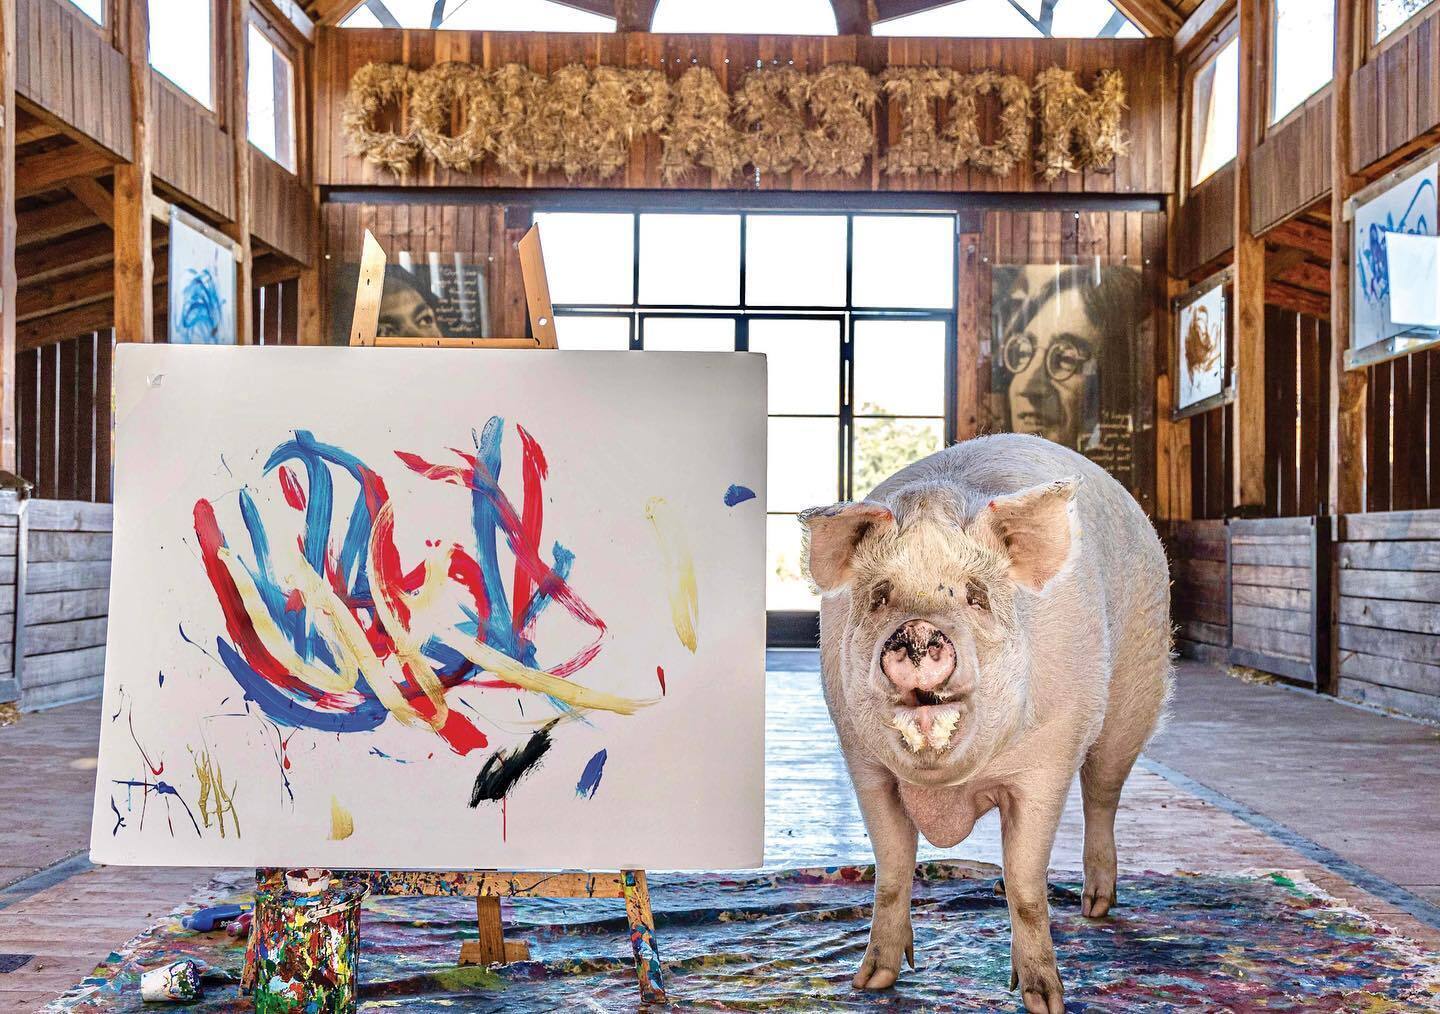 A pig named Pigcasso earned more than a million dollars by painting pictures: her works are in the collection of George Clooney